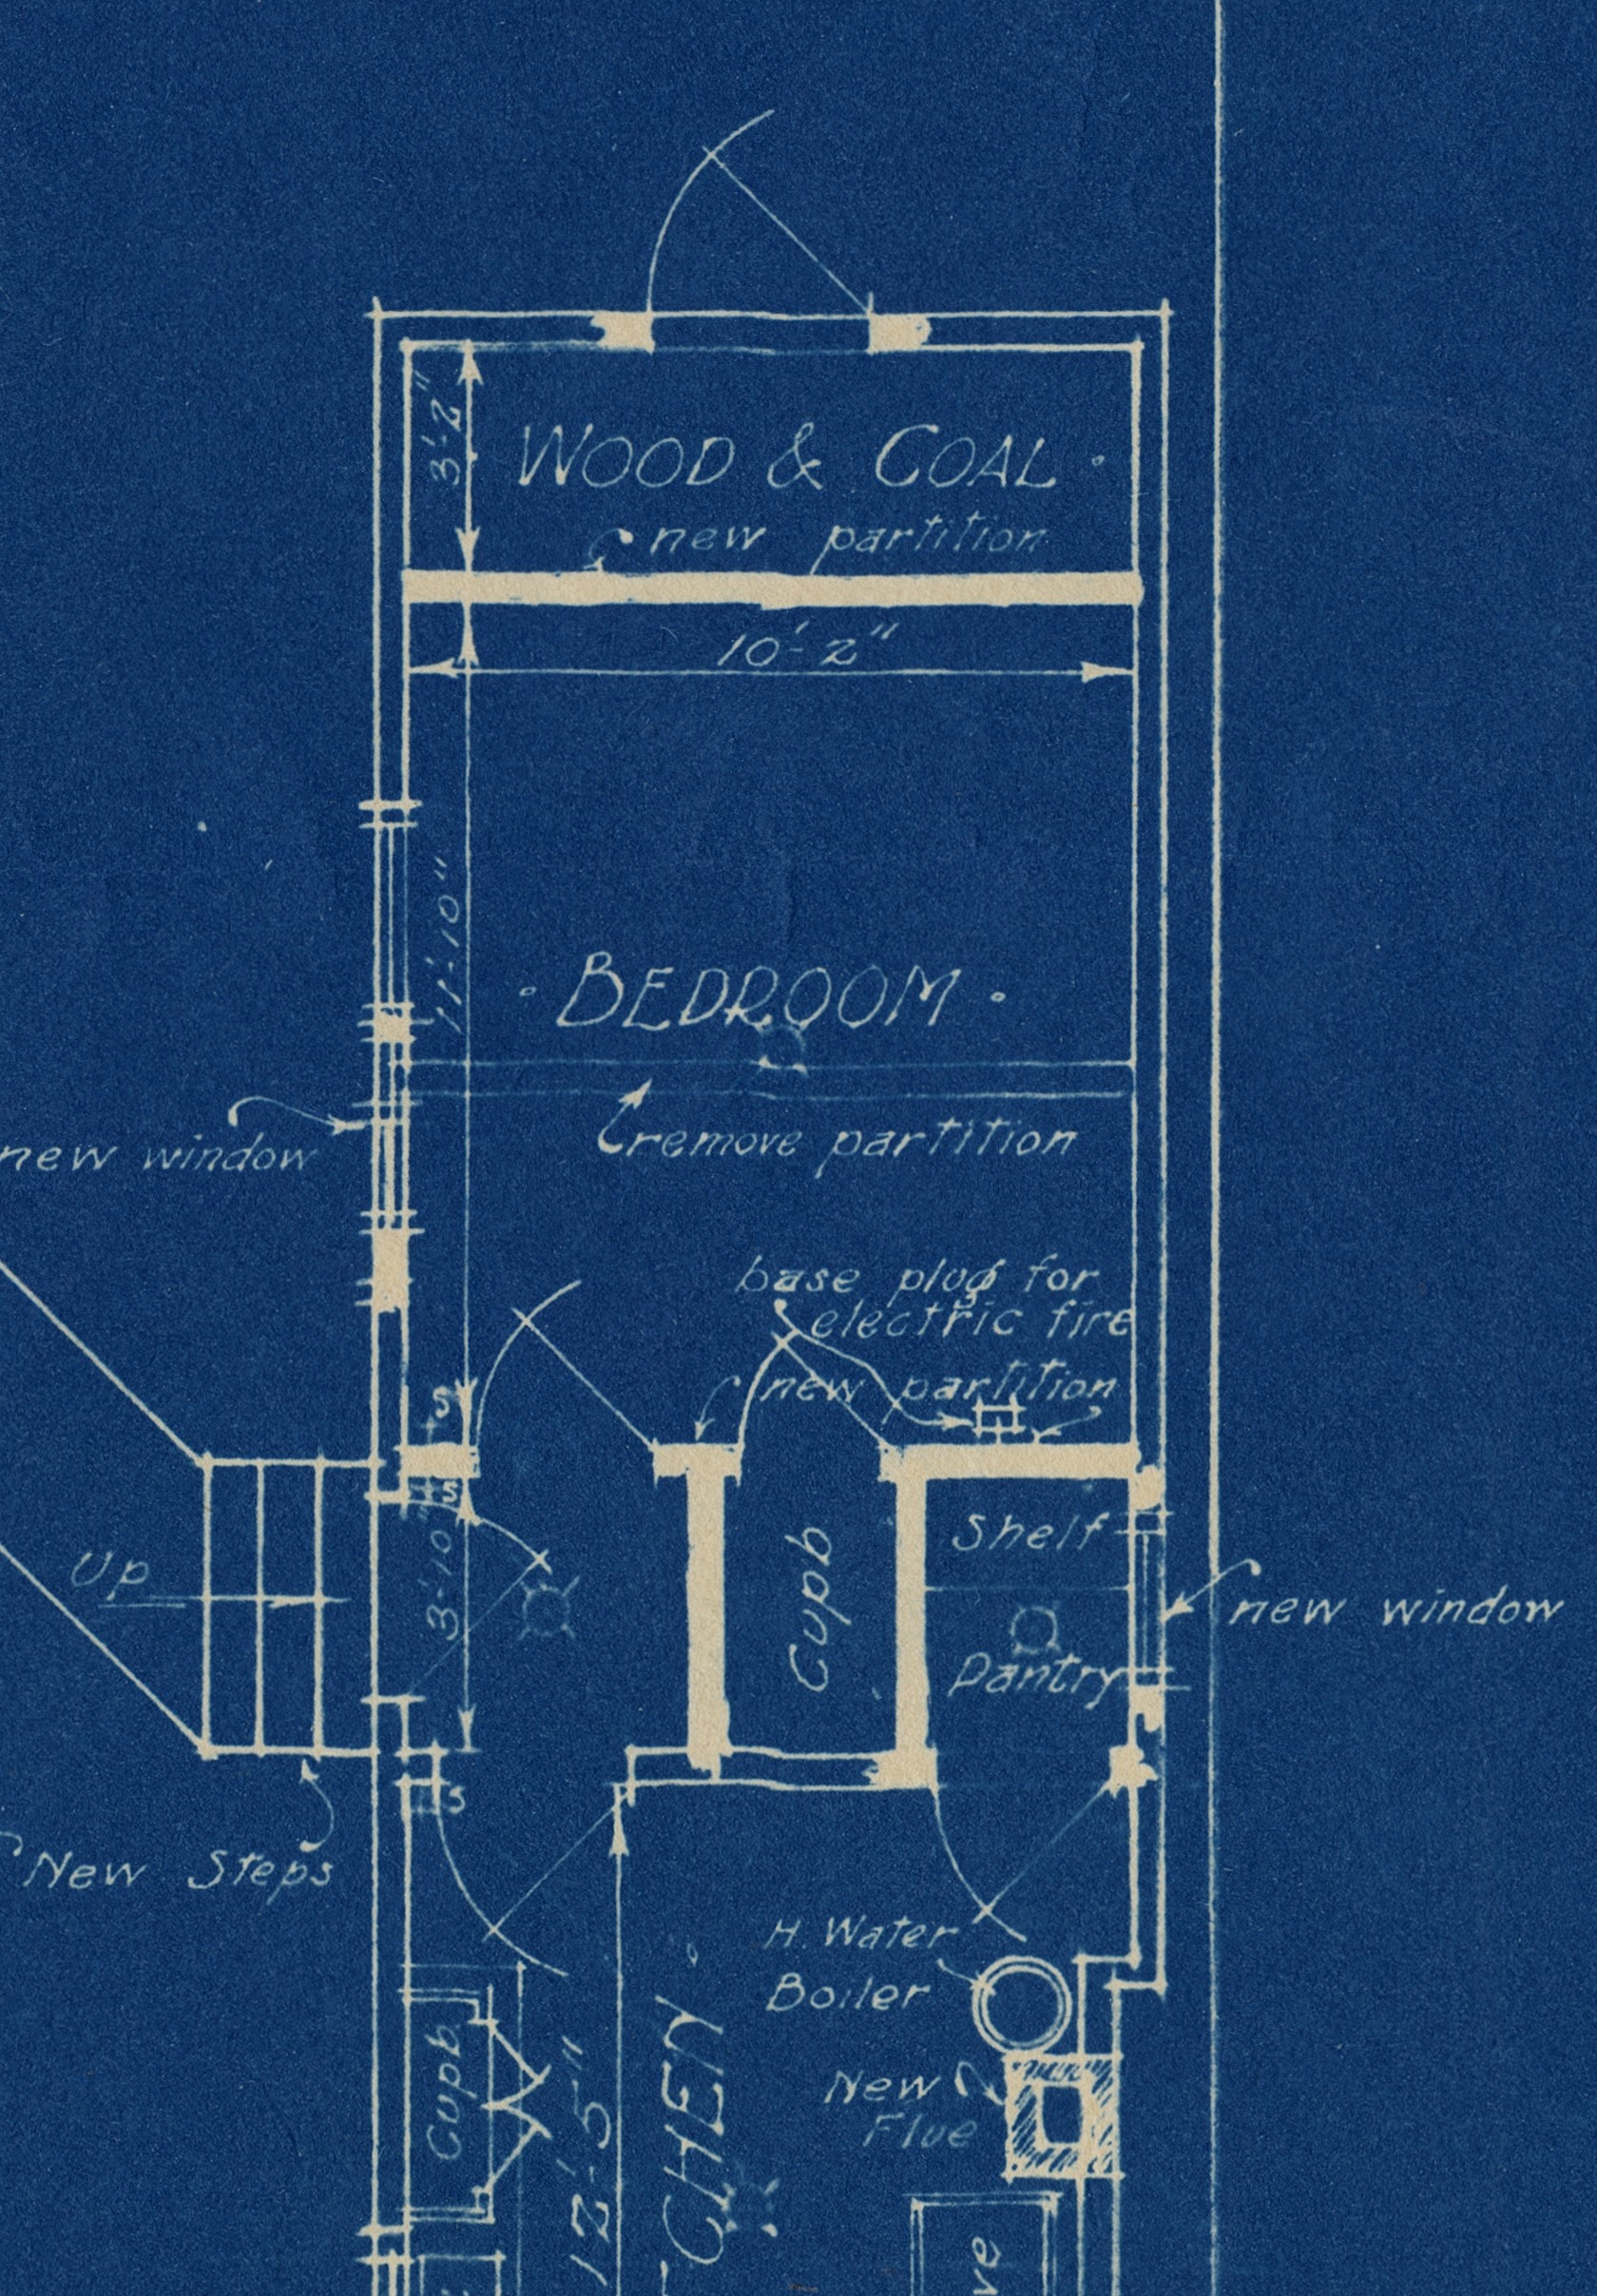 Details of the architectural plan for alterations to 1132 Robson Street. Notations as to the removal of certain features, and the addition or changes of others can be seen.